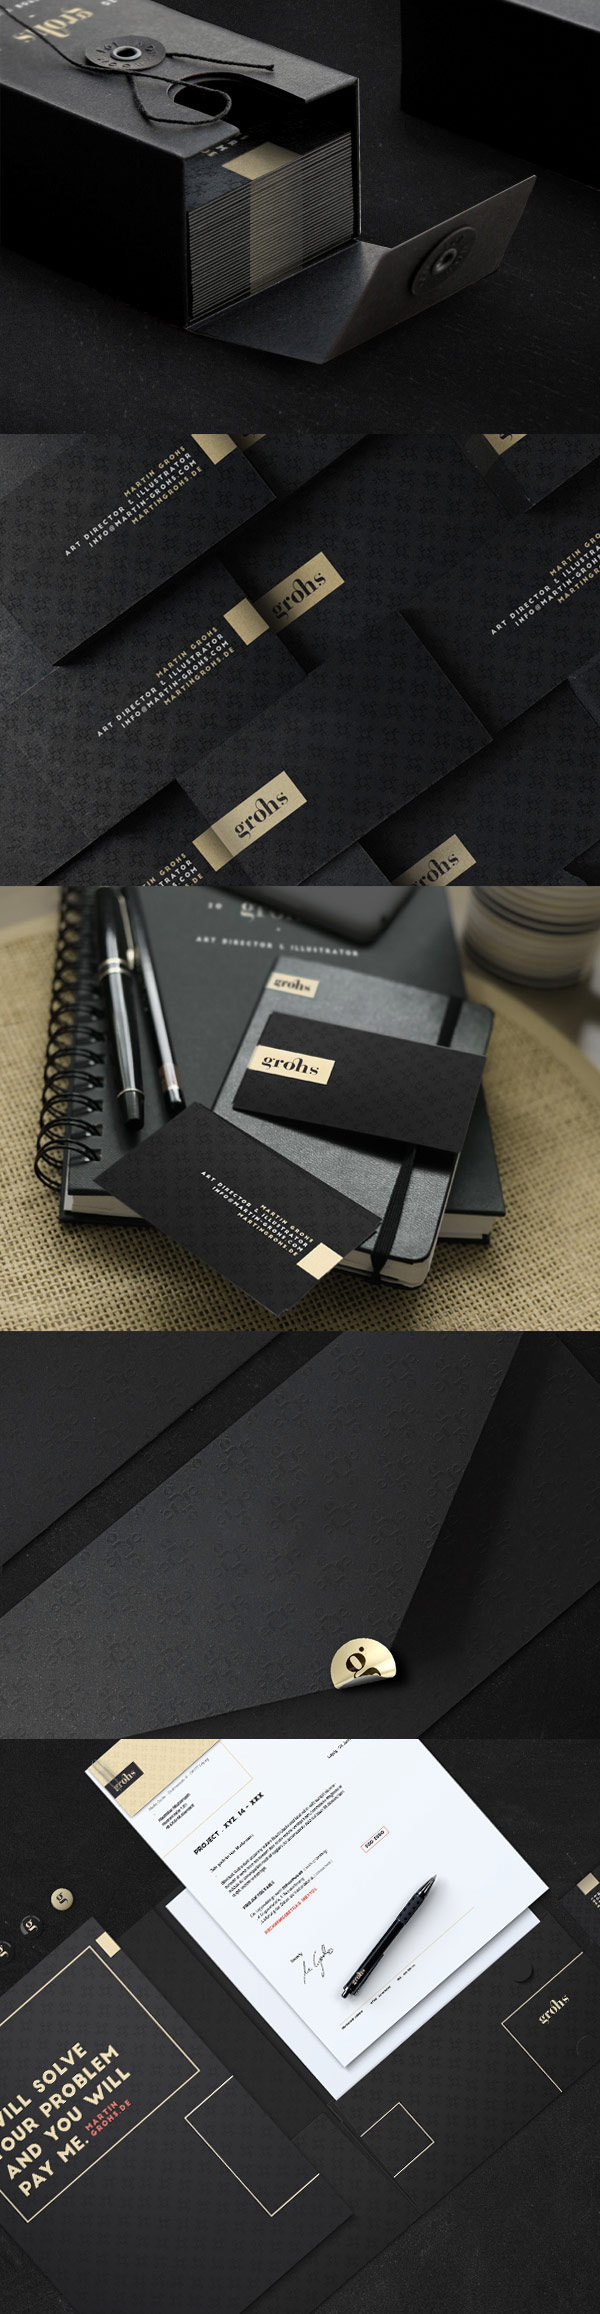 Business cards, stationery, and printed collateral.